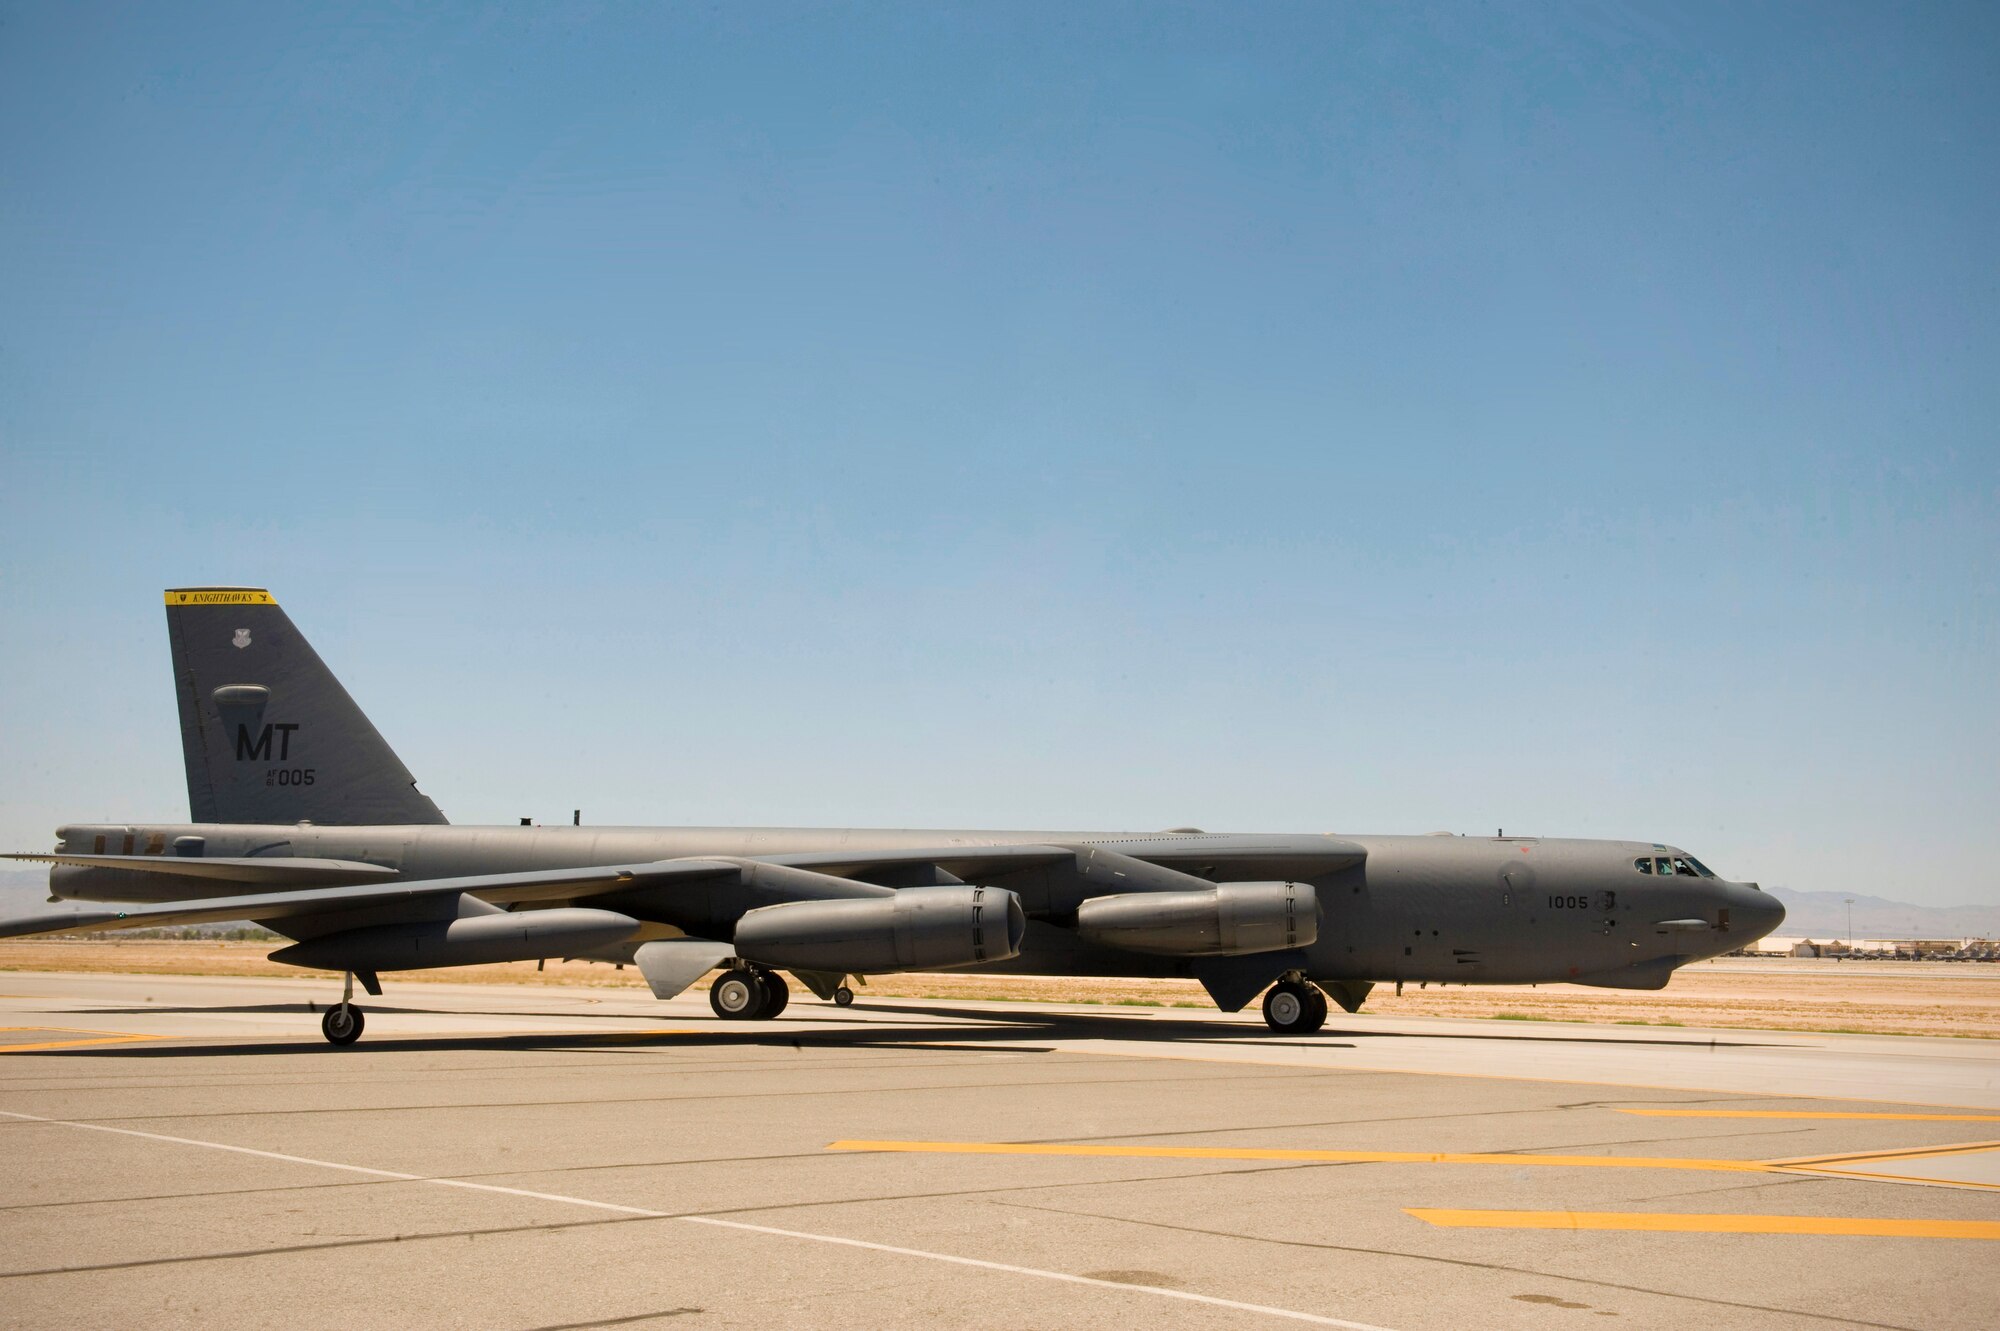 A B-52H Stratofortress assigned to the 69th Bomb Squadron, Minot Air Force Base, N.D., taxis for take off during Red Flag 15-3 at Nellis Air Force Base, Nev., July 15, 2015. The B-52 is a long-range heavy bomber capable of dropping or launching a wide variety of munitions on any target anywhere in the world. (U.S. Air Force photo by Airman 1st Class Rachel Loftis)